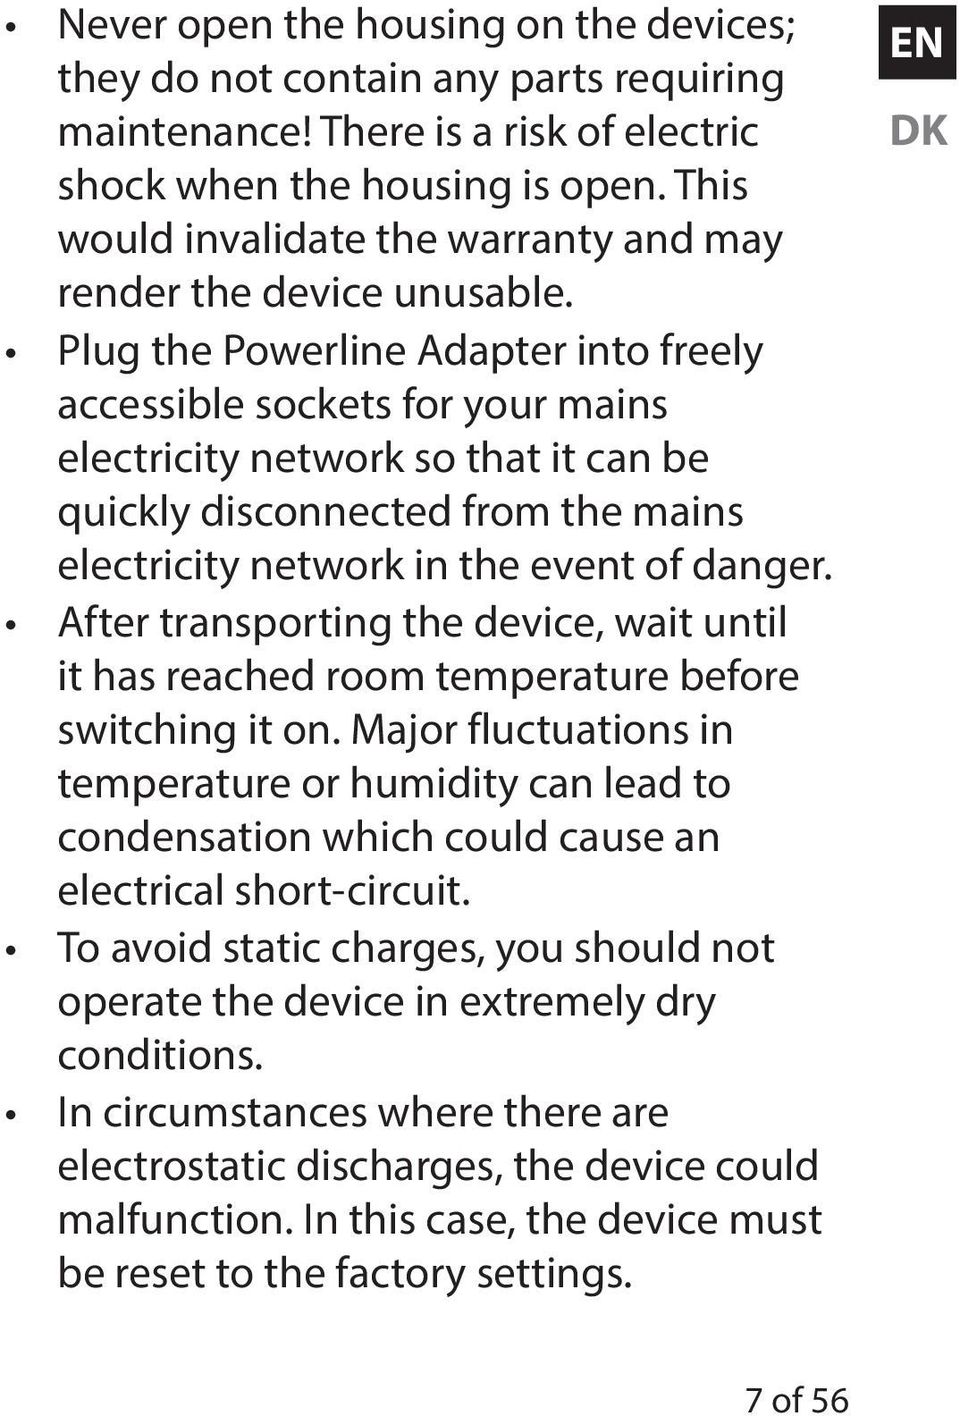 Plug the Powerline Adapter into freely accessible sockets for your mains electricity network so that it can be quickly disconnected from the mains electricity network in the event of danger.